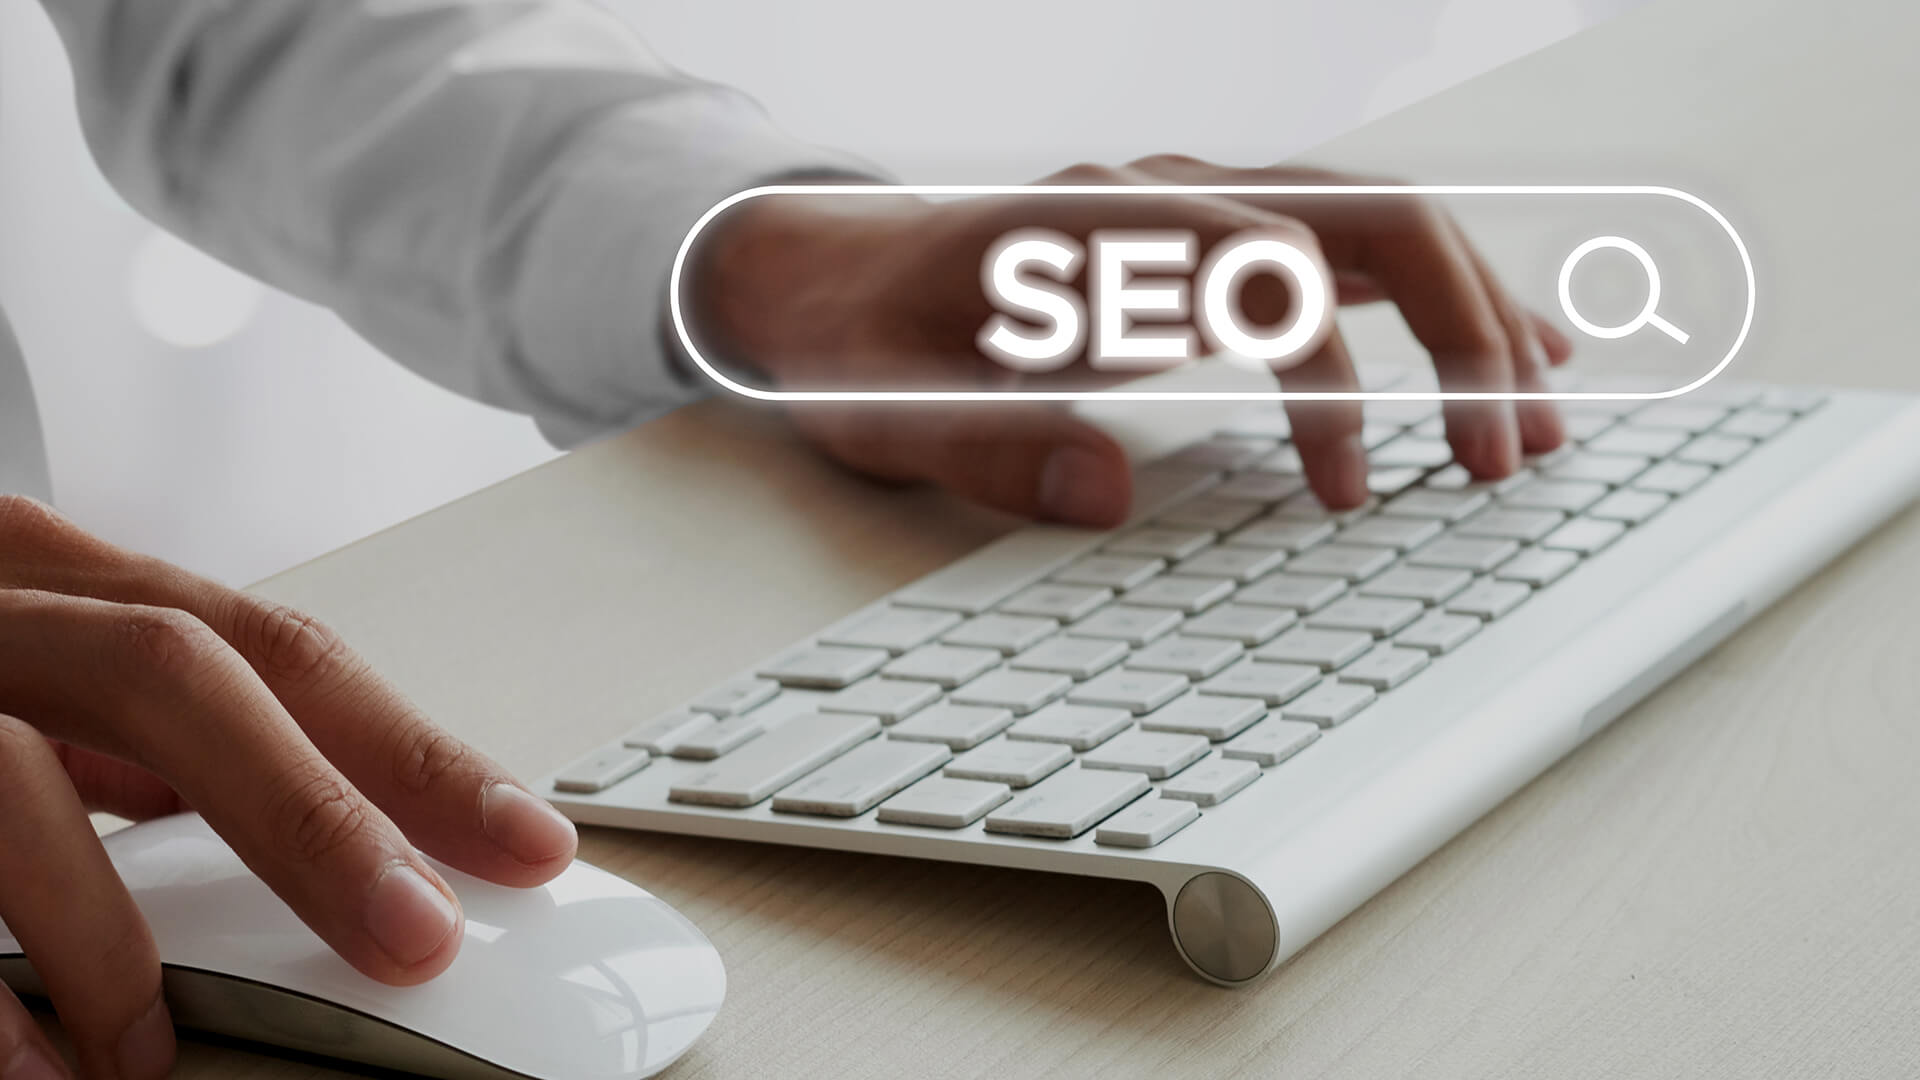 importance of SEO for businesses and how a digital marketing agency in Dubai can help